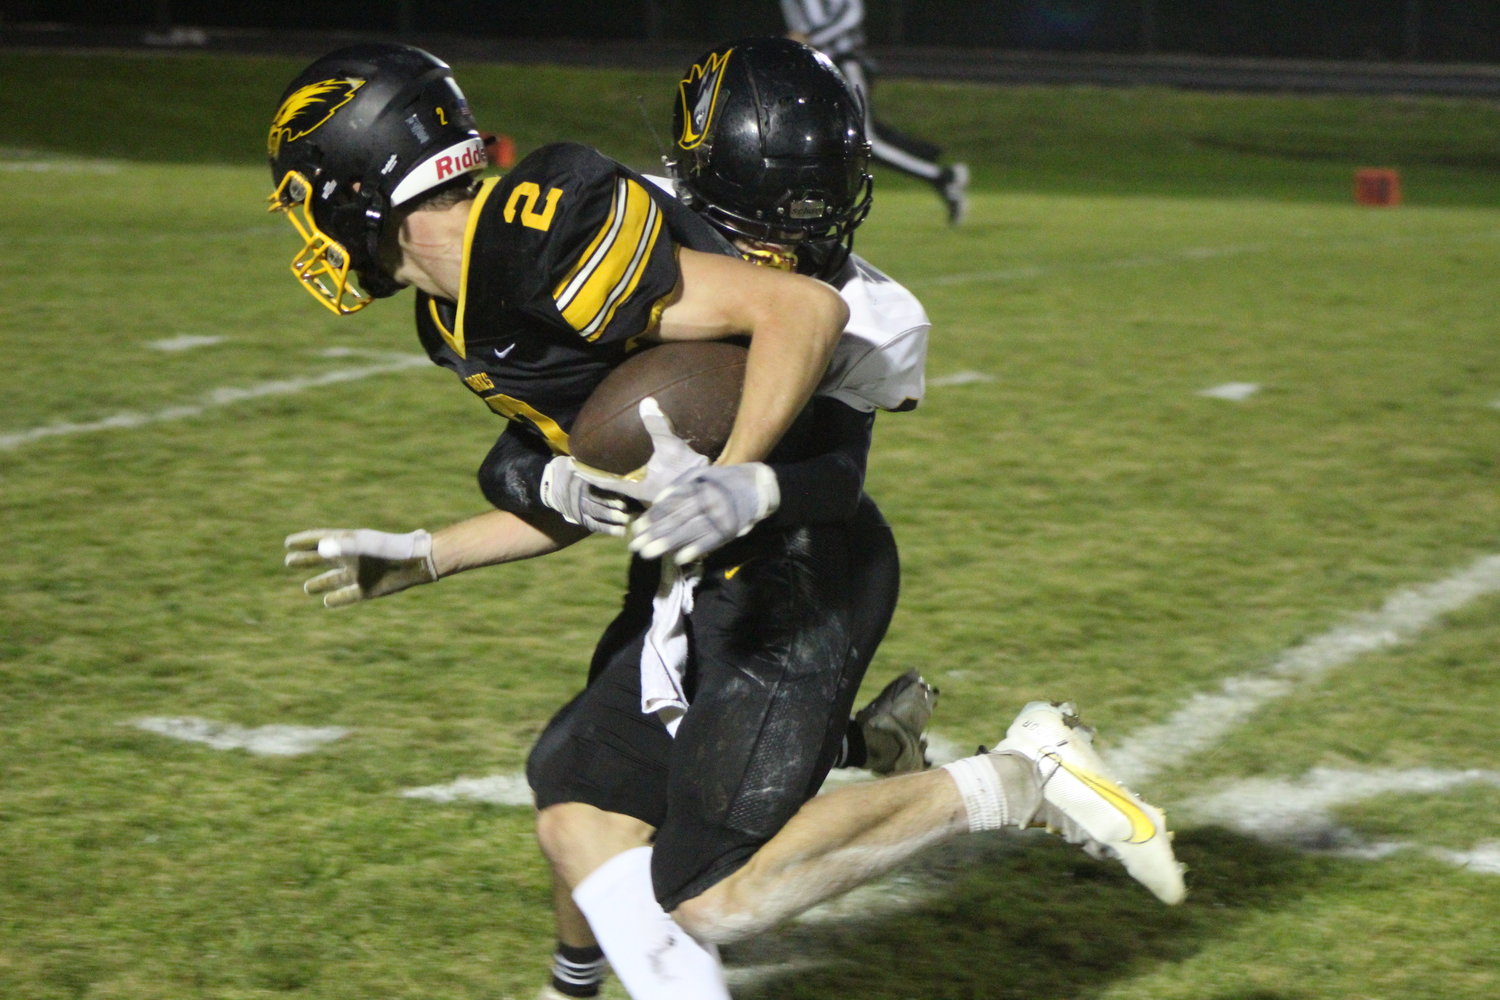 Mid-Prairie receiver Cain Brown tries to get around Central Lee's Grant Myhre after catching a pass from Collin Miller.